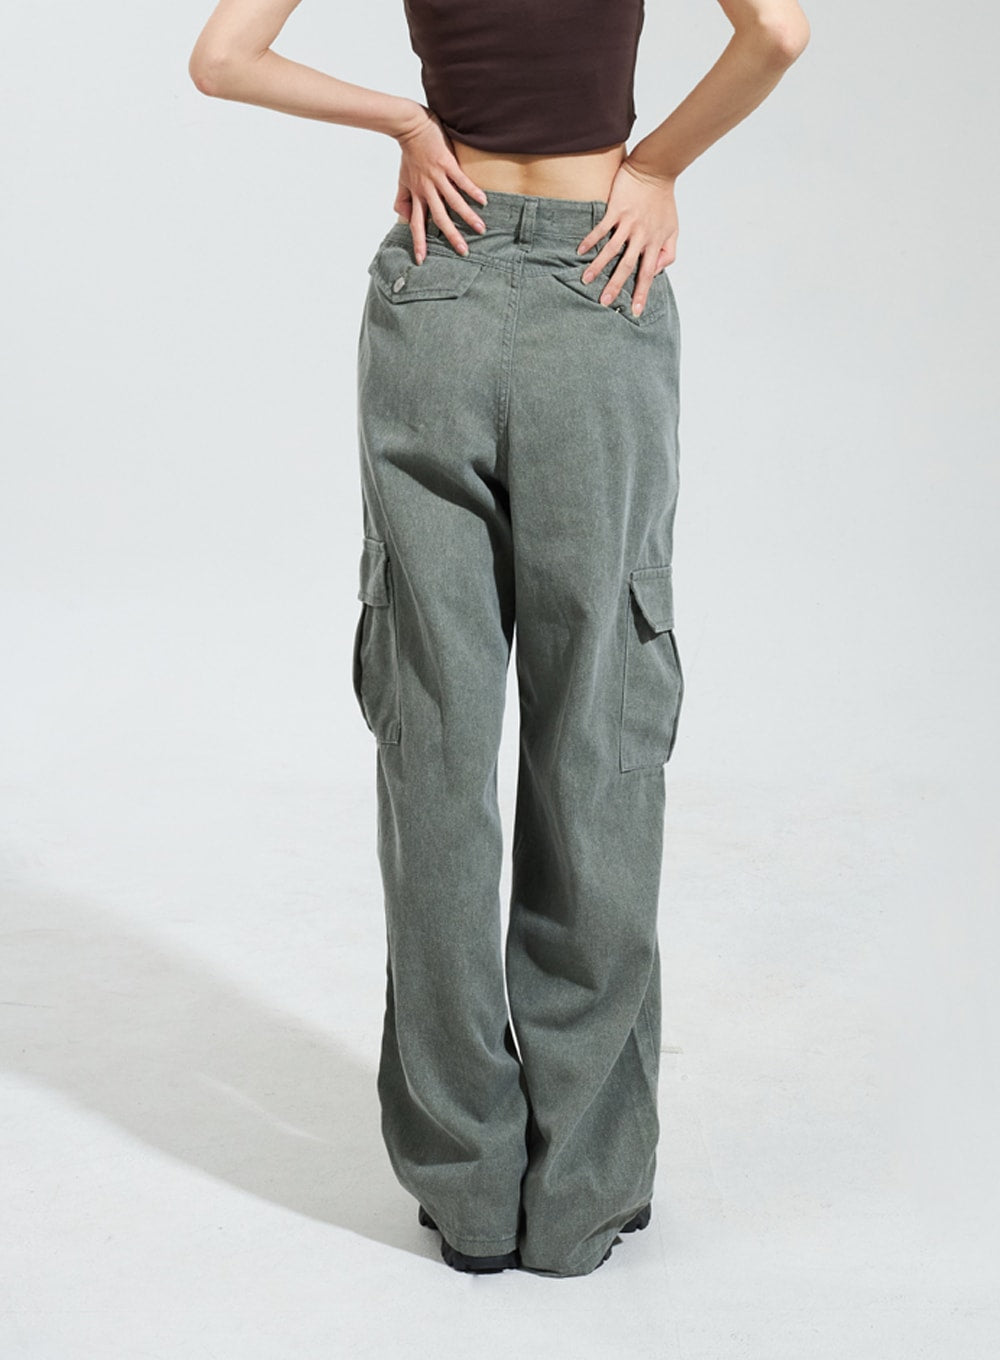 Cut Out Cargo Pants IY318